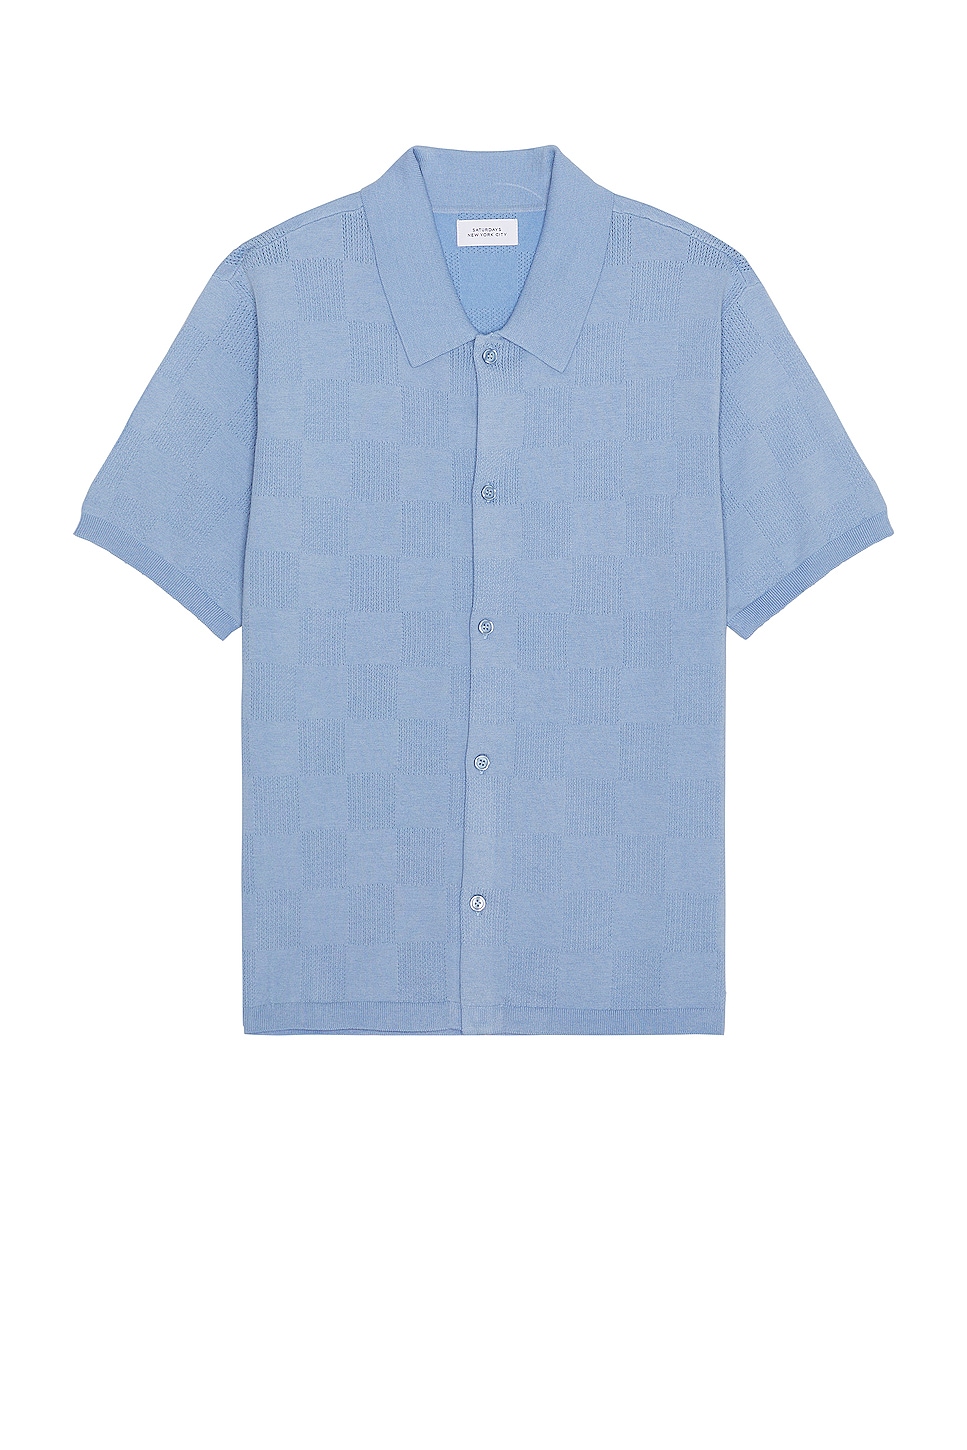 Image 1 of SATURDAYS NYC Kenneth Checkerboard Knit Short Sleeve Shirt in Forever Blue